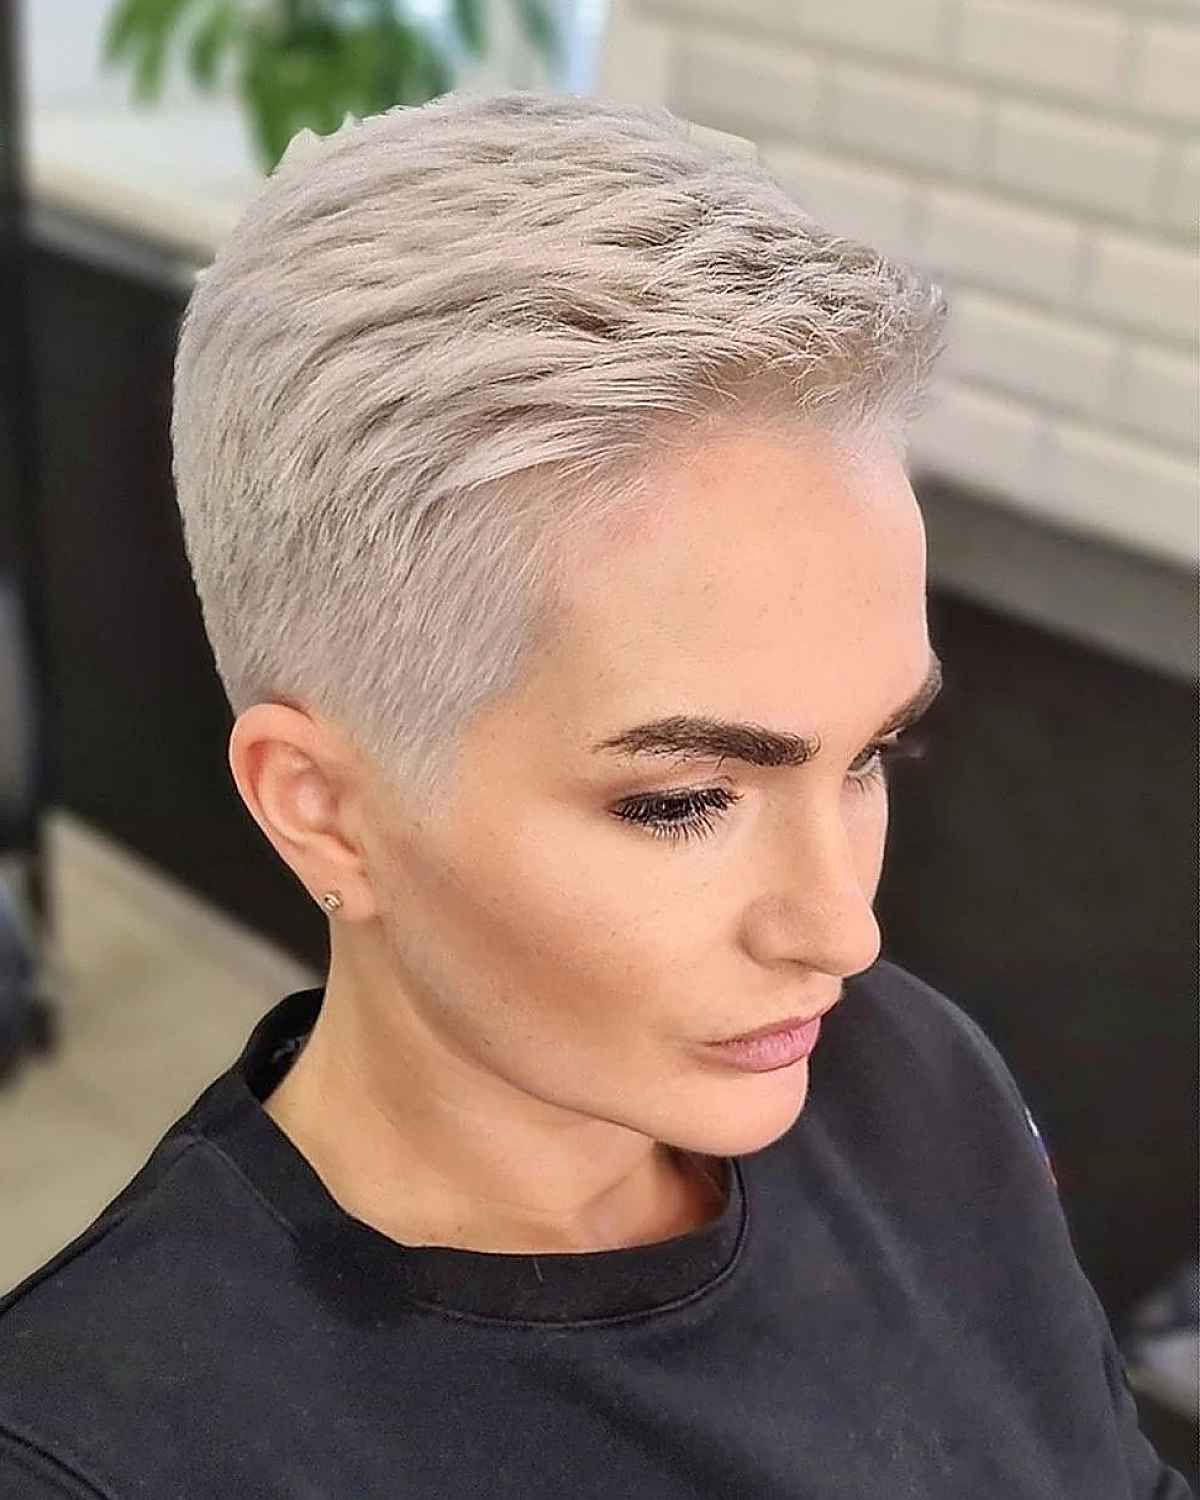 25 Very Short Haircuts For Women Trending In 2022 For Extra Short Women’s Hairstyles Idea (View 5 of 20)